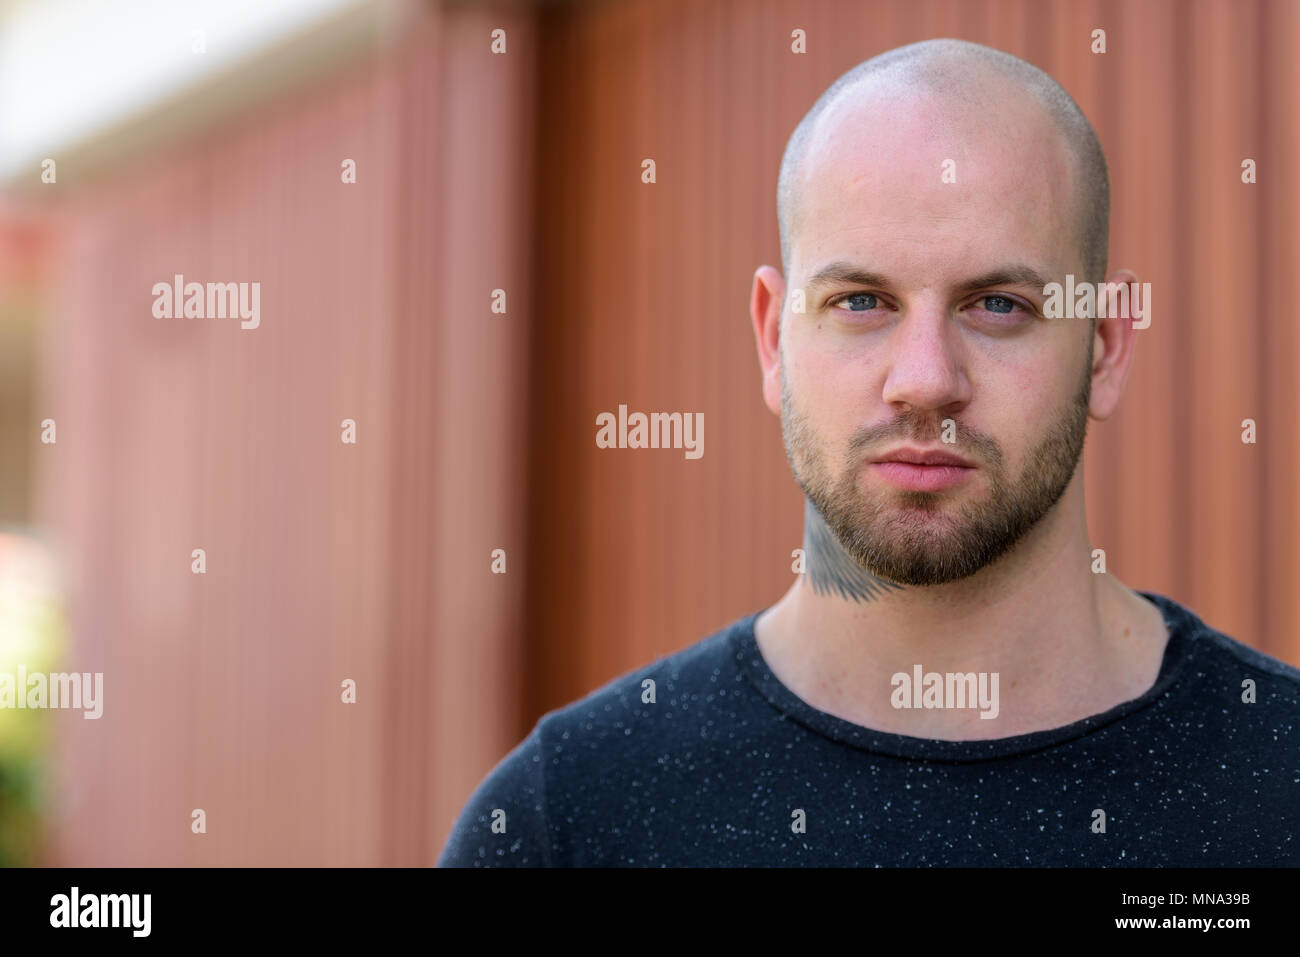 Portrait of young bald muscular man outdoors Stock Photo